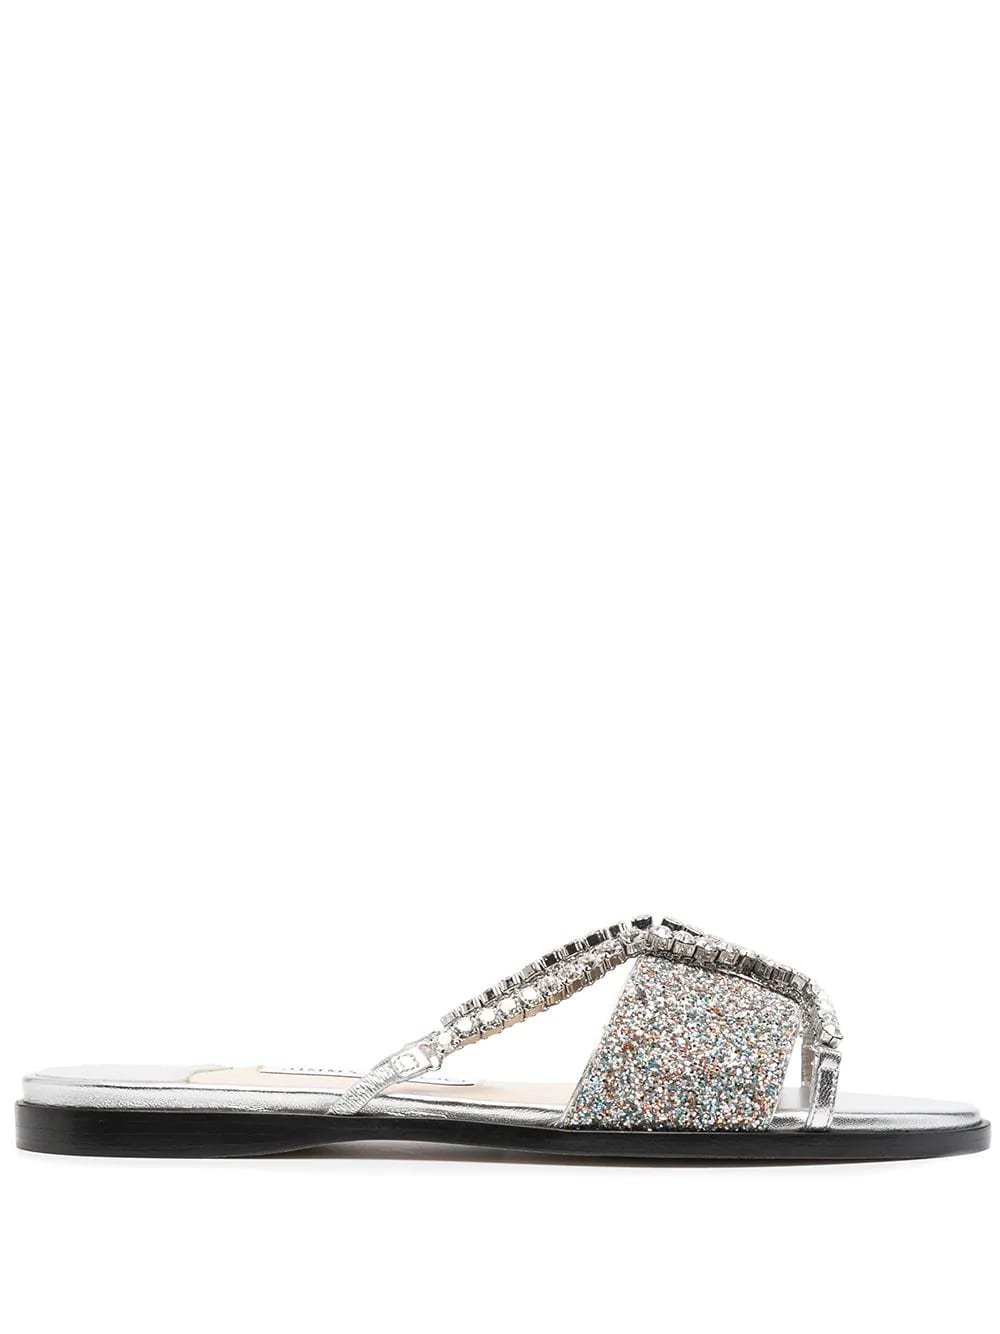 Buy Jimmy Choo Silver And Multicolor Glitter Aadi Flat Sandal online, shop Jimmy Choo shoes with free shipping